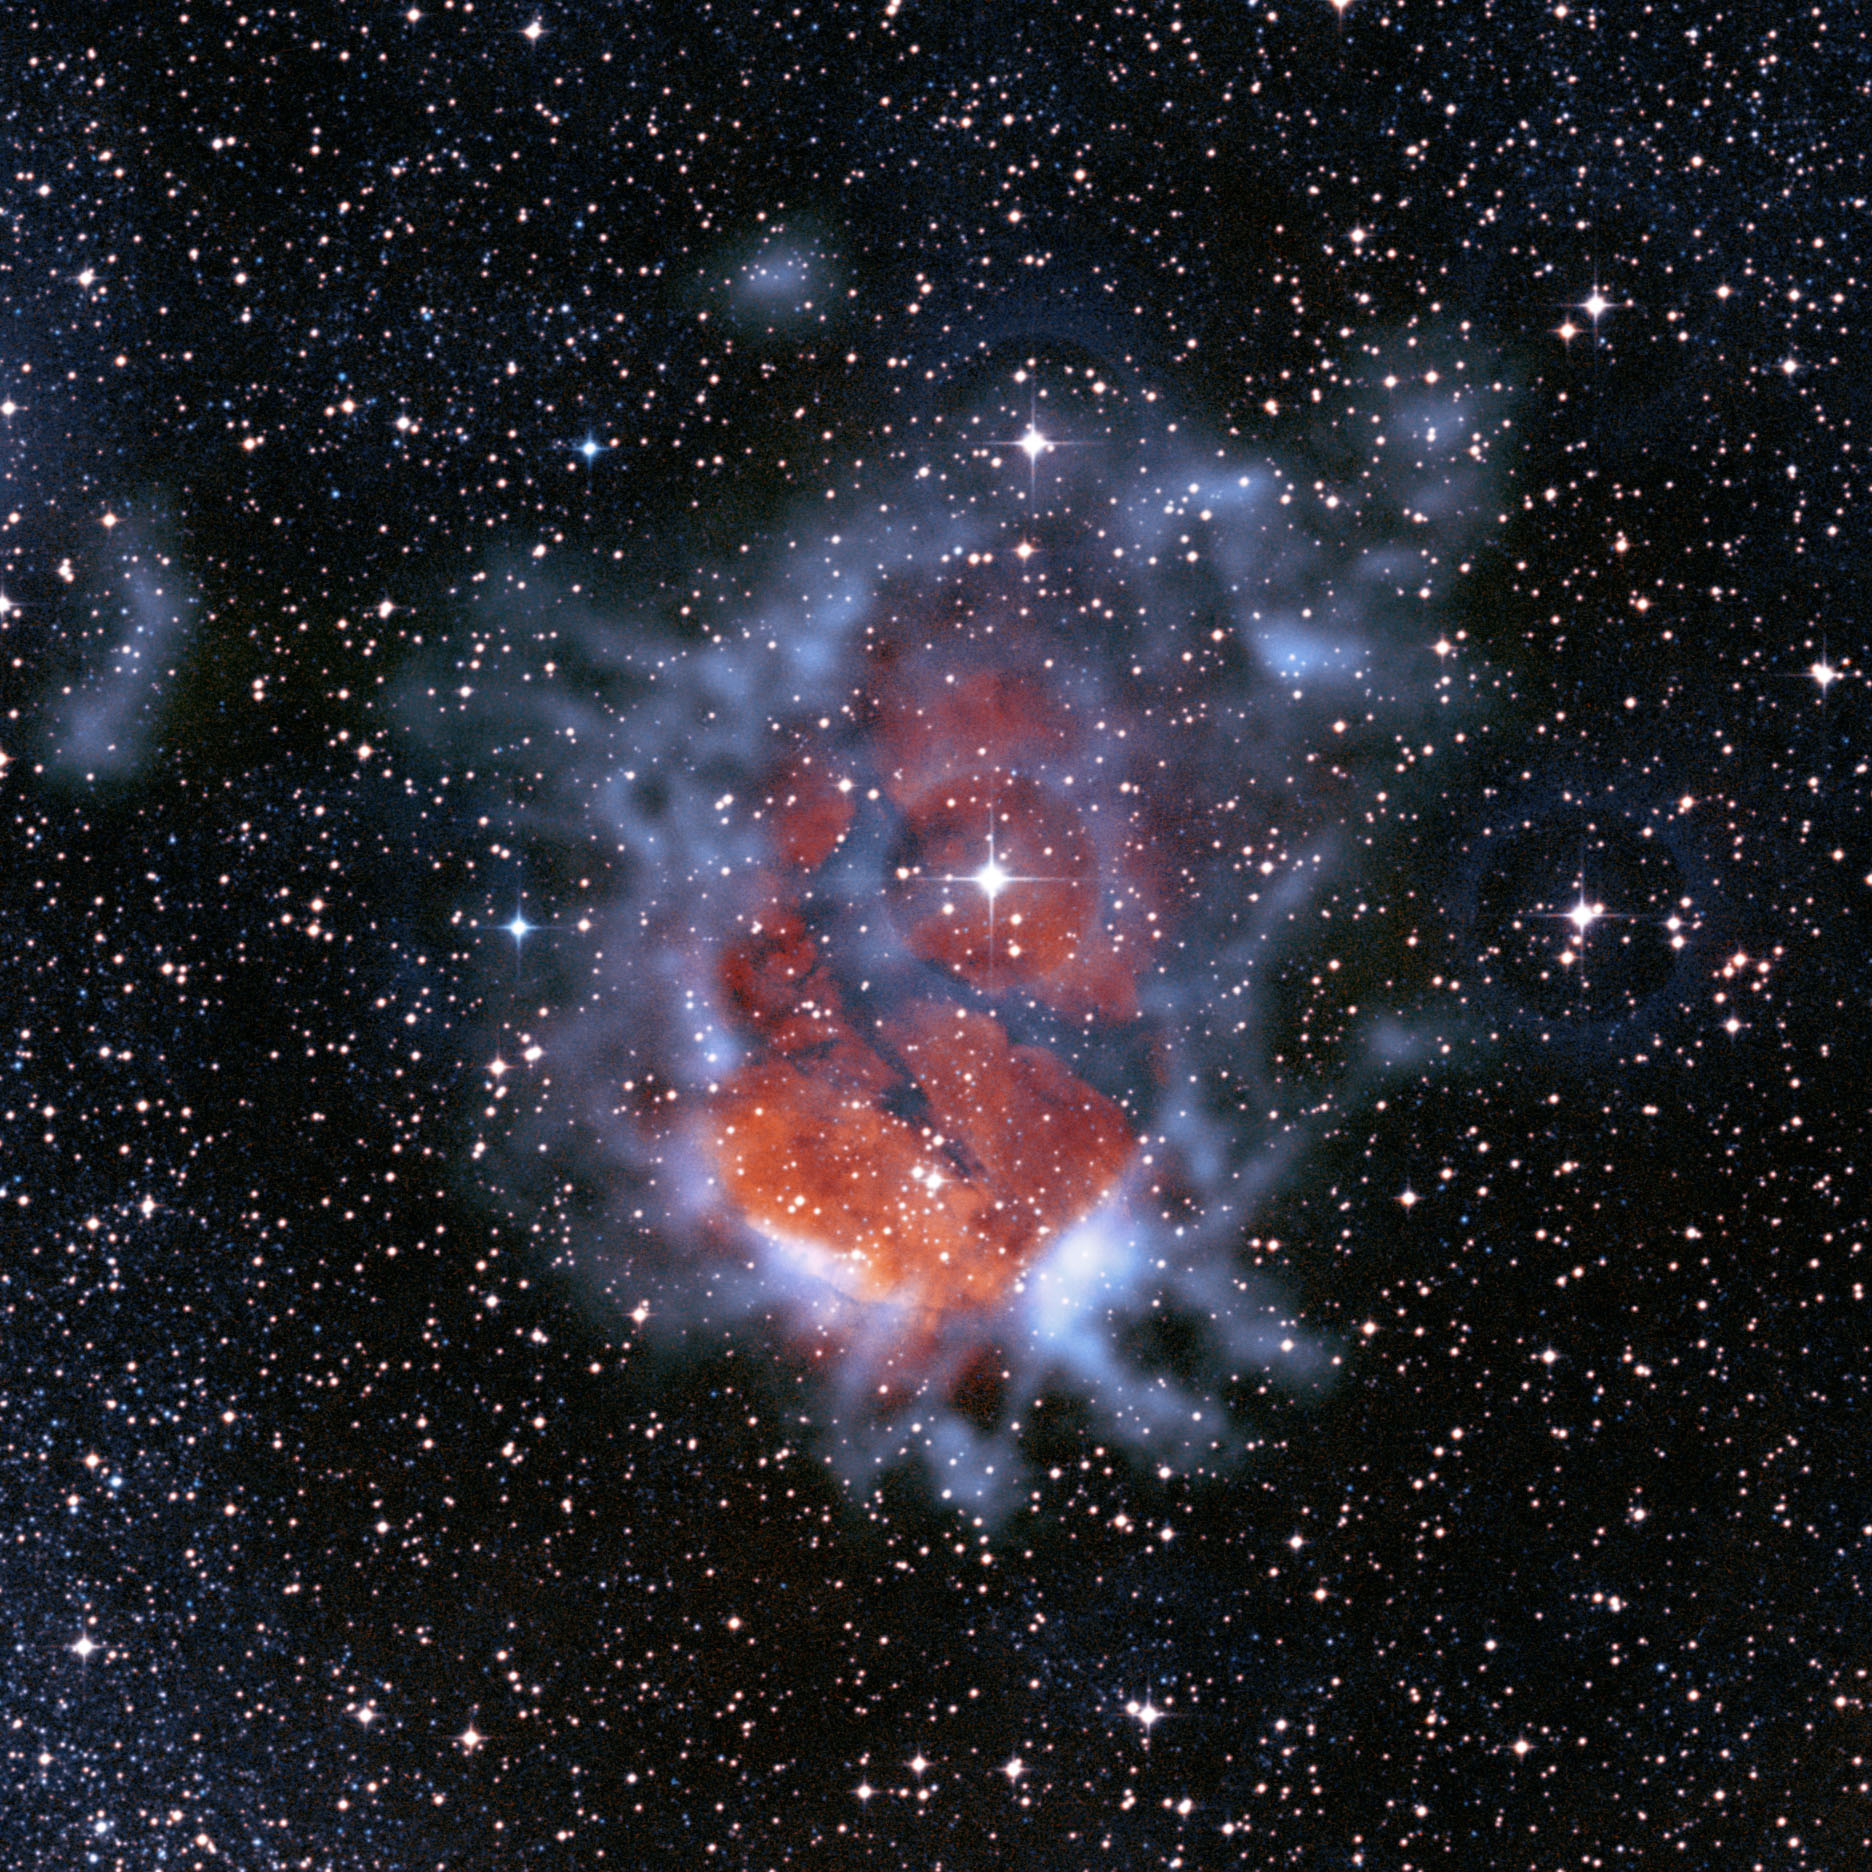 Image of RCW 120 Nebula Shows Expanding Bubble of Ionized Gas1872 x 1872